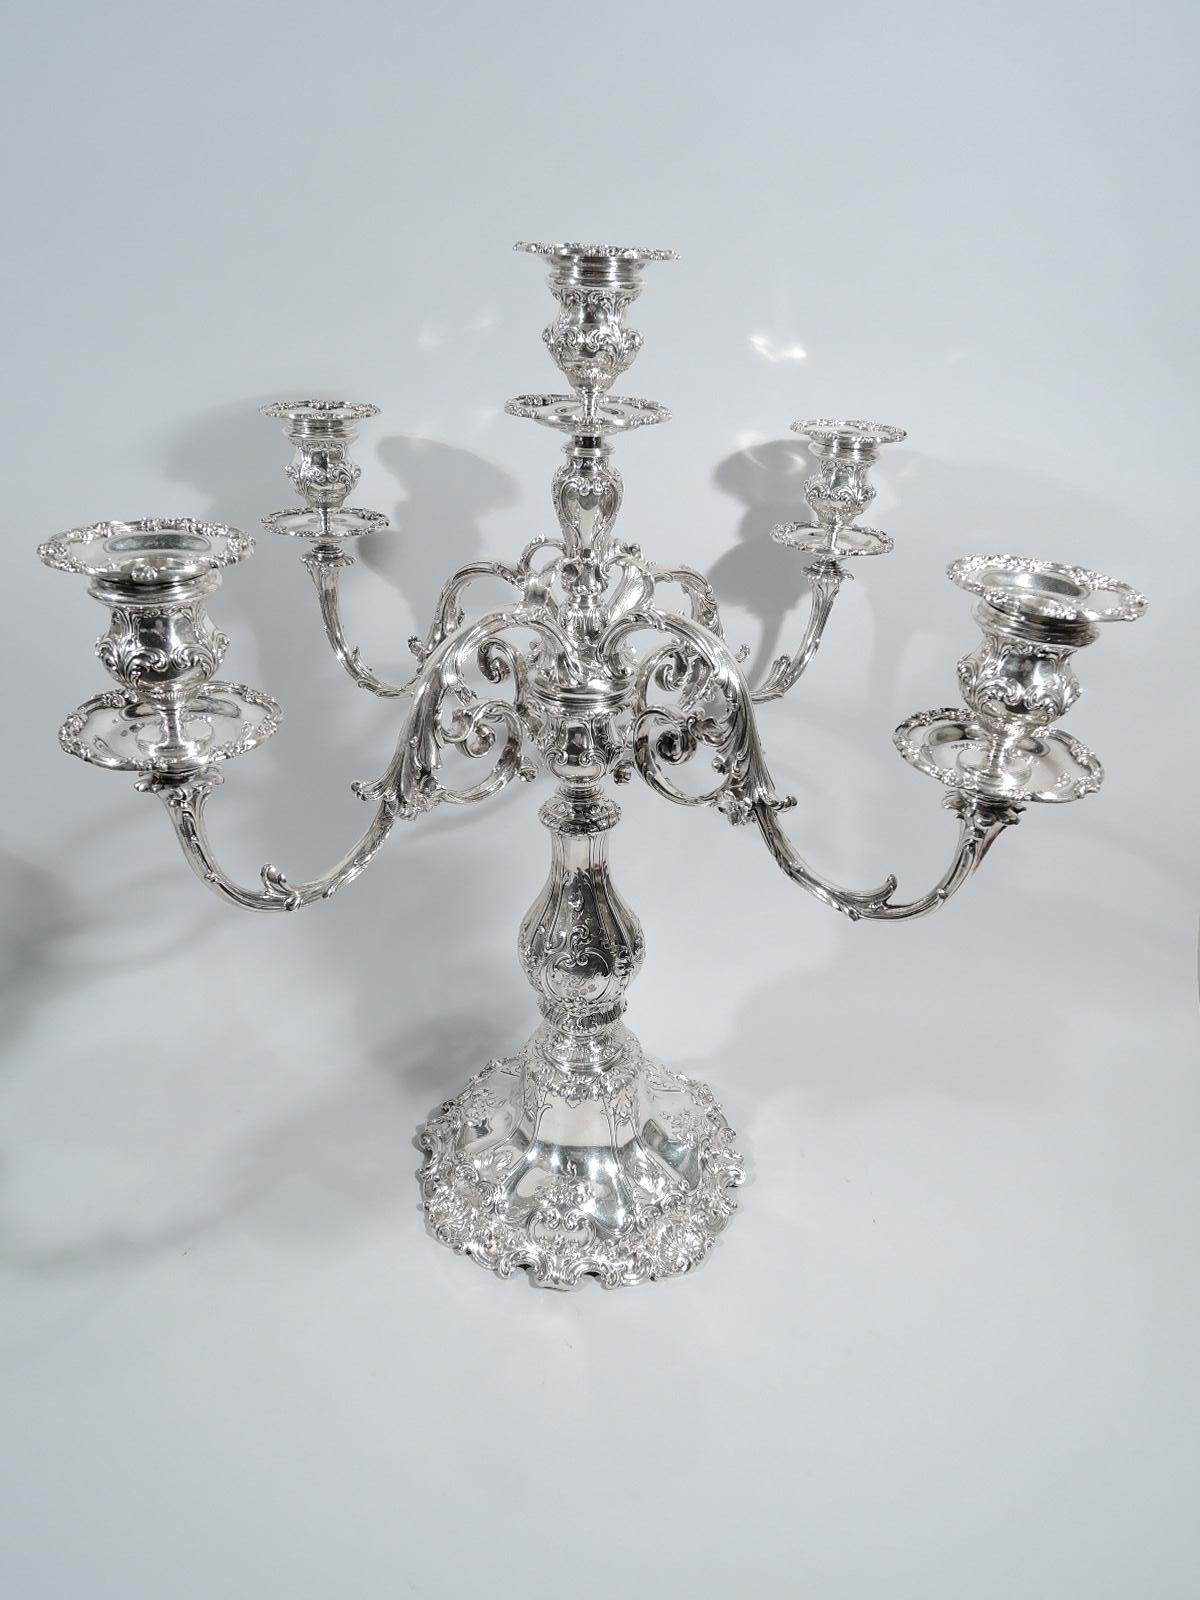 Pair of Edwardian sterling silver 5-light candelabra. Made by Gorham in Providence in 1908. Each: Sturdy baluster shaft on domed foot. Urn supporting central baluster terminating in socket, surrounded by 4 leaf-capped and mounted scrolled branches,